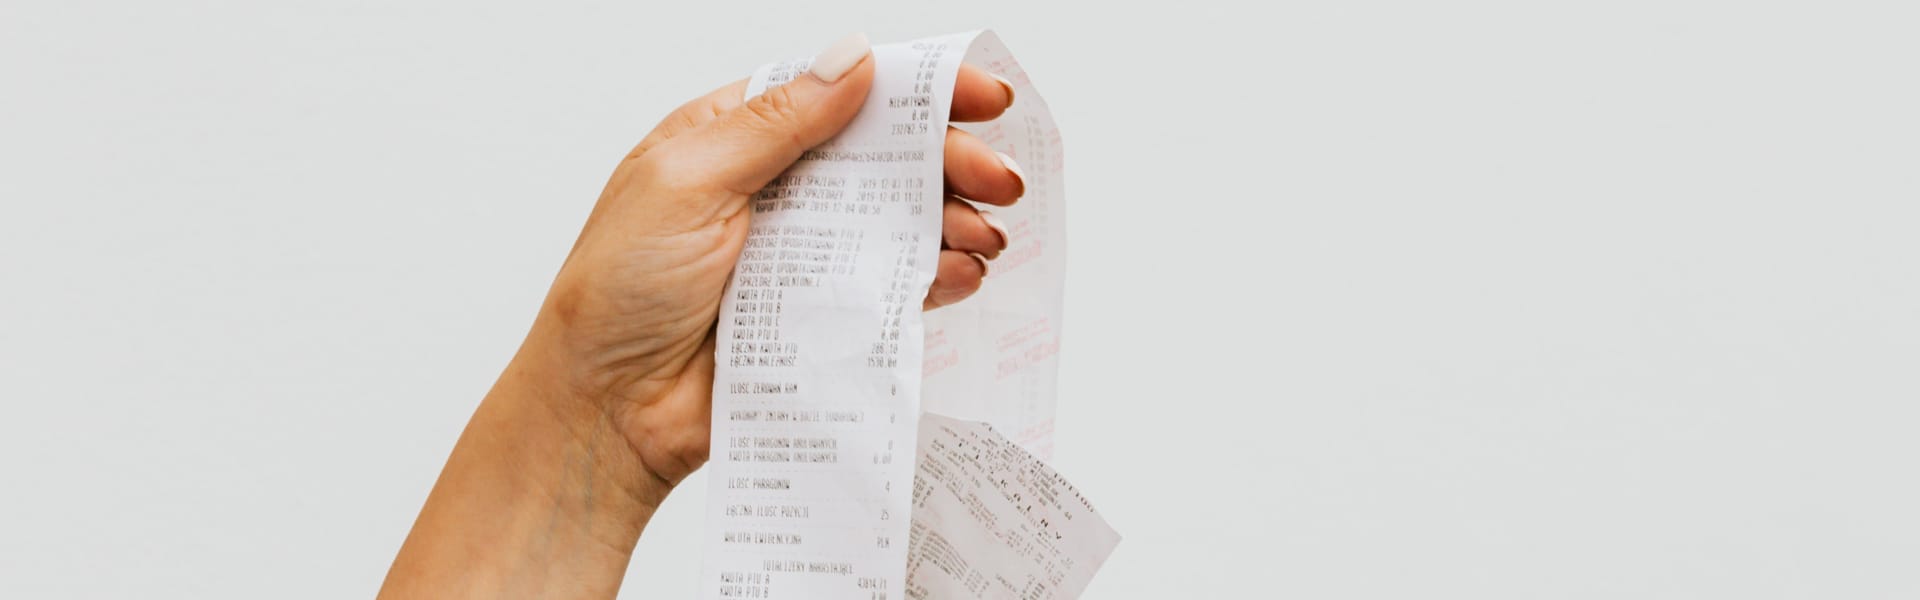 How Long Do Small-Business Owners Need To Keep Receipts?